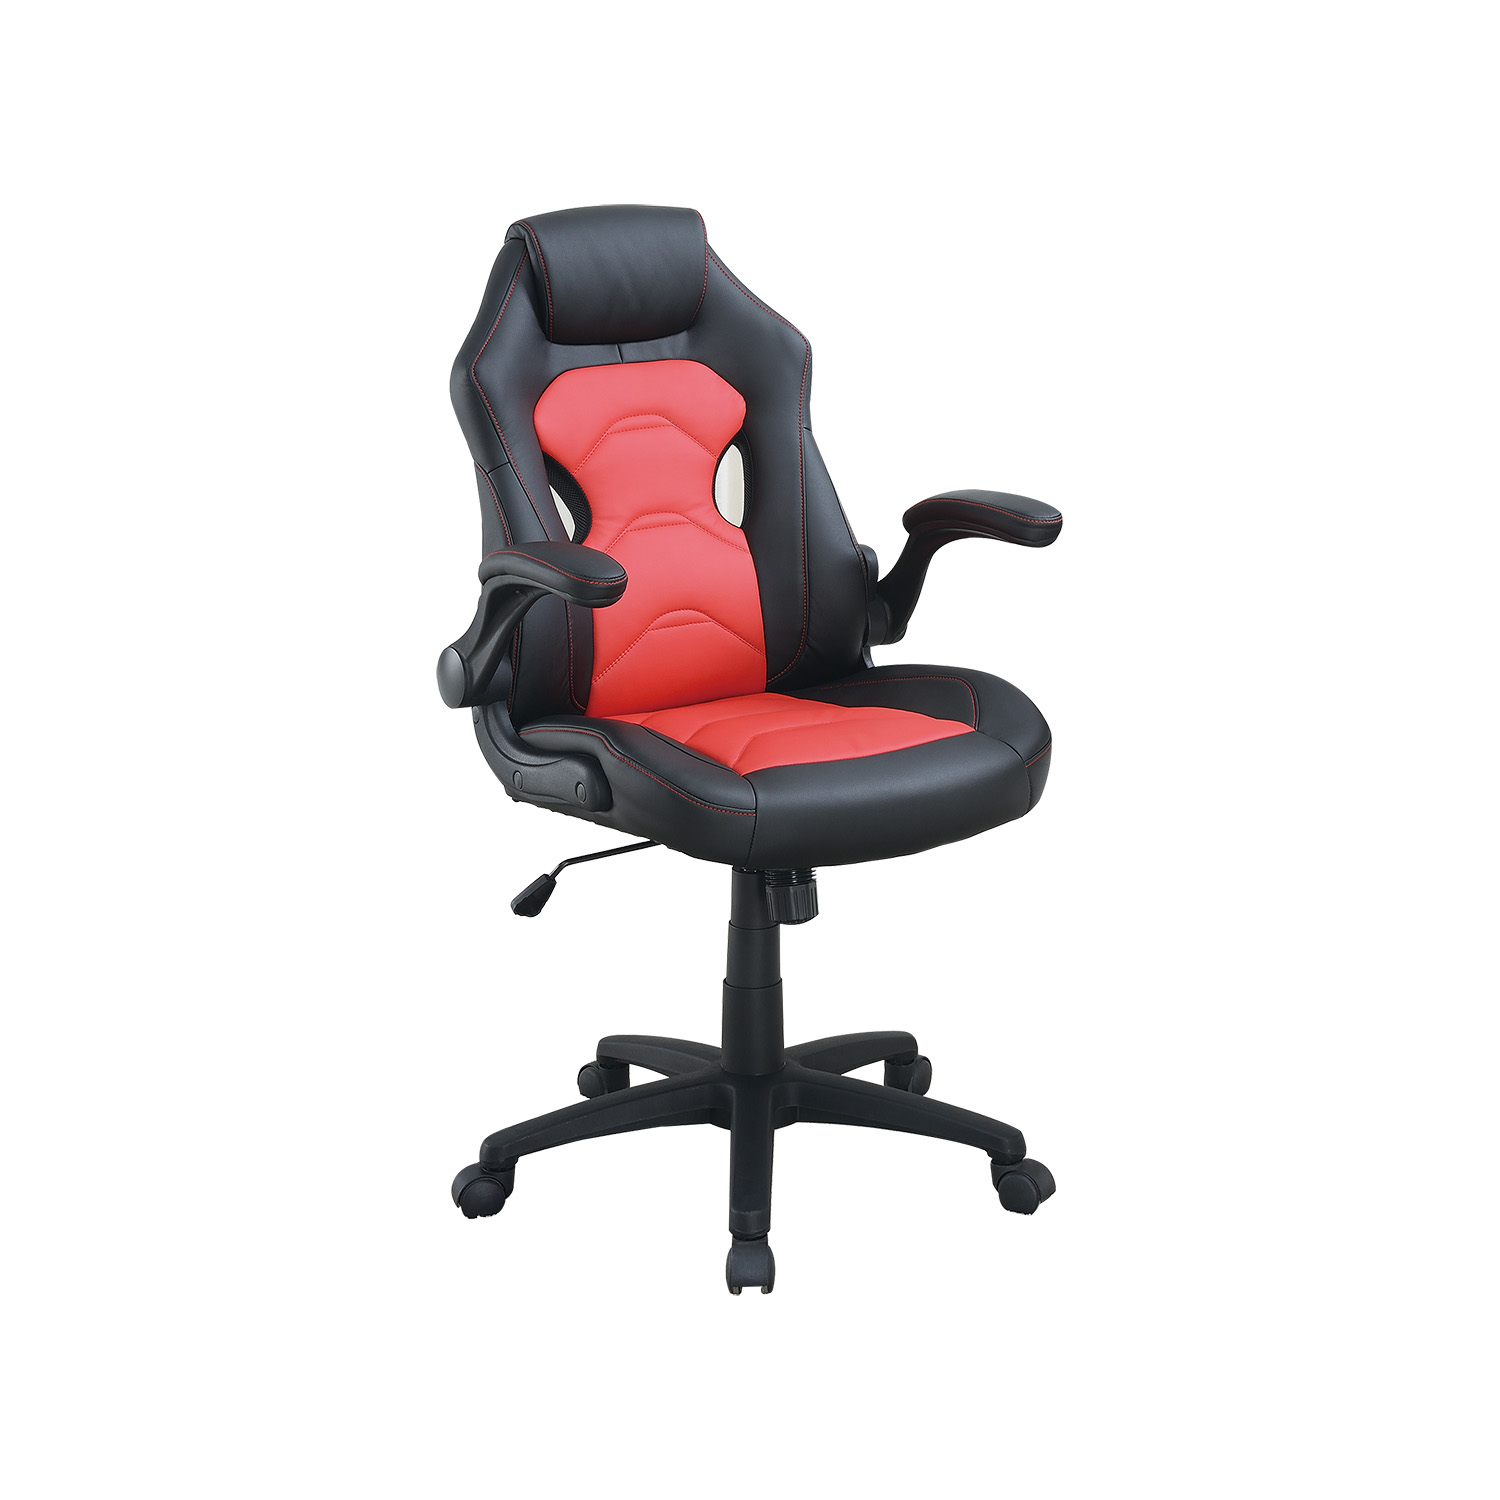 Adjustable Height Swivel Executive Computer Chair in Black and Red-CASAINC